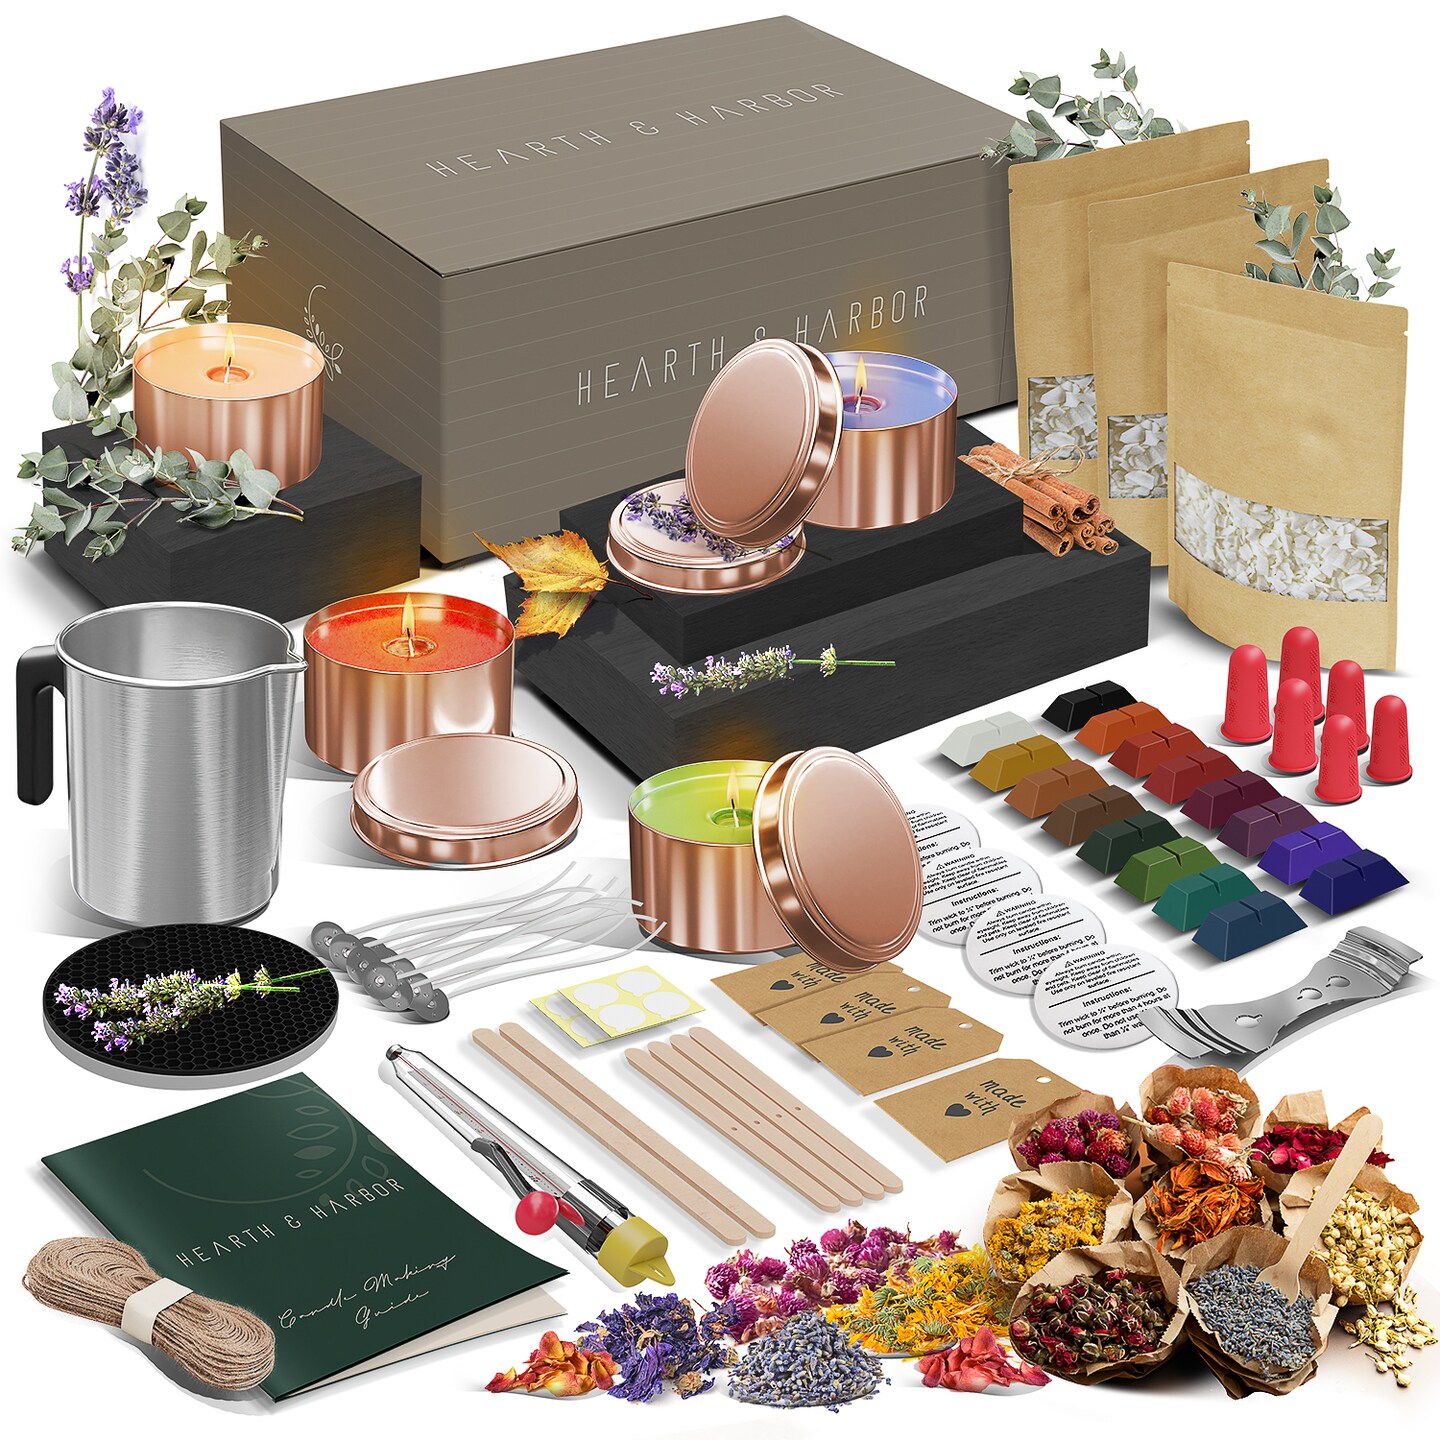 Hearth & Harbor DIY Natural Soy Candle Making Kit with Dried